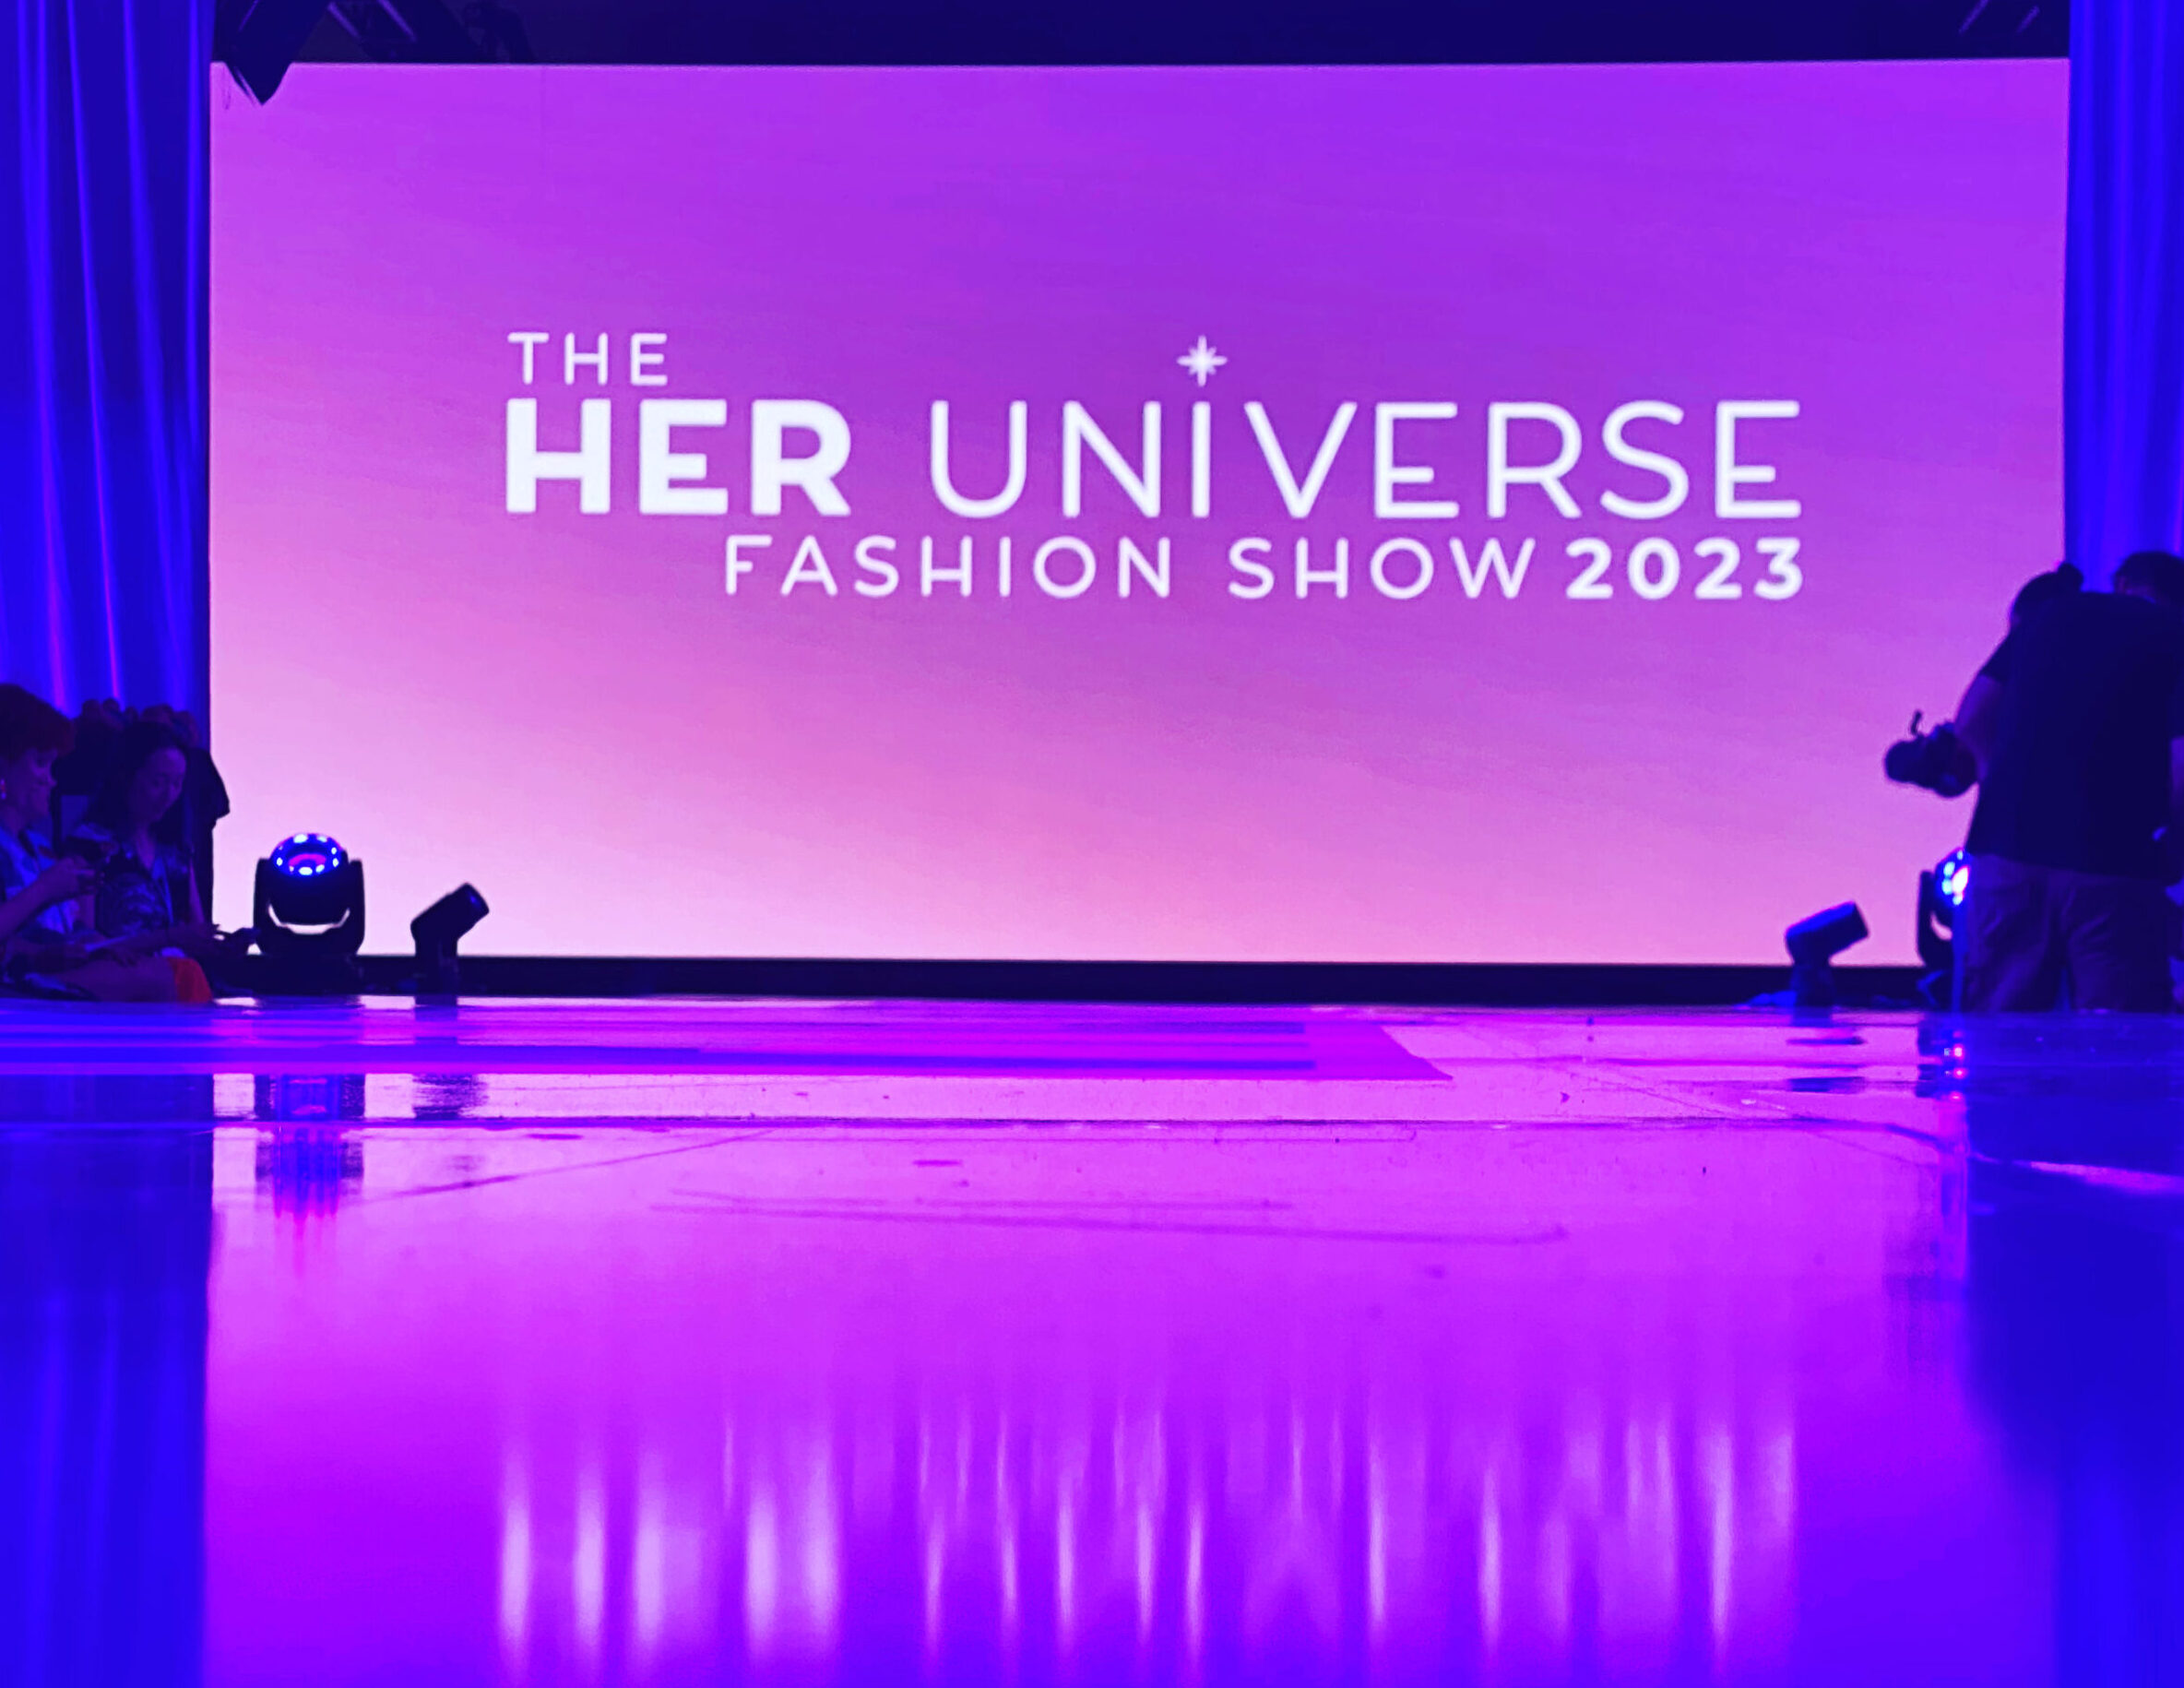 Her Universe Fashion Show Showcases Fandom With Record Breaking Turnout!